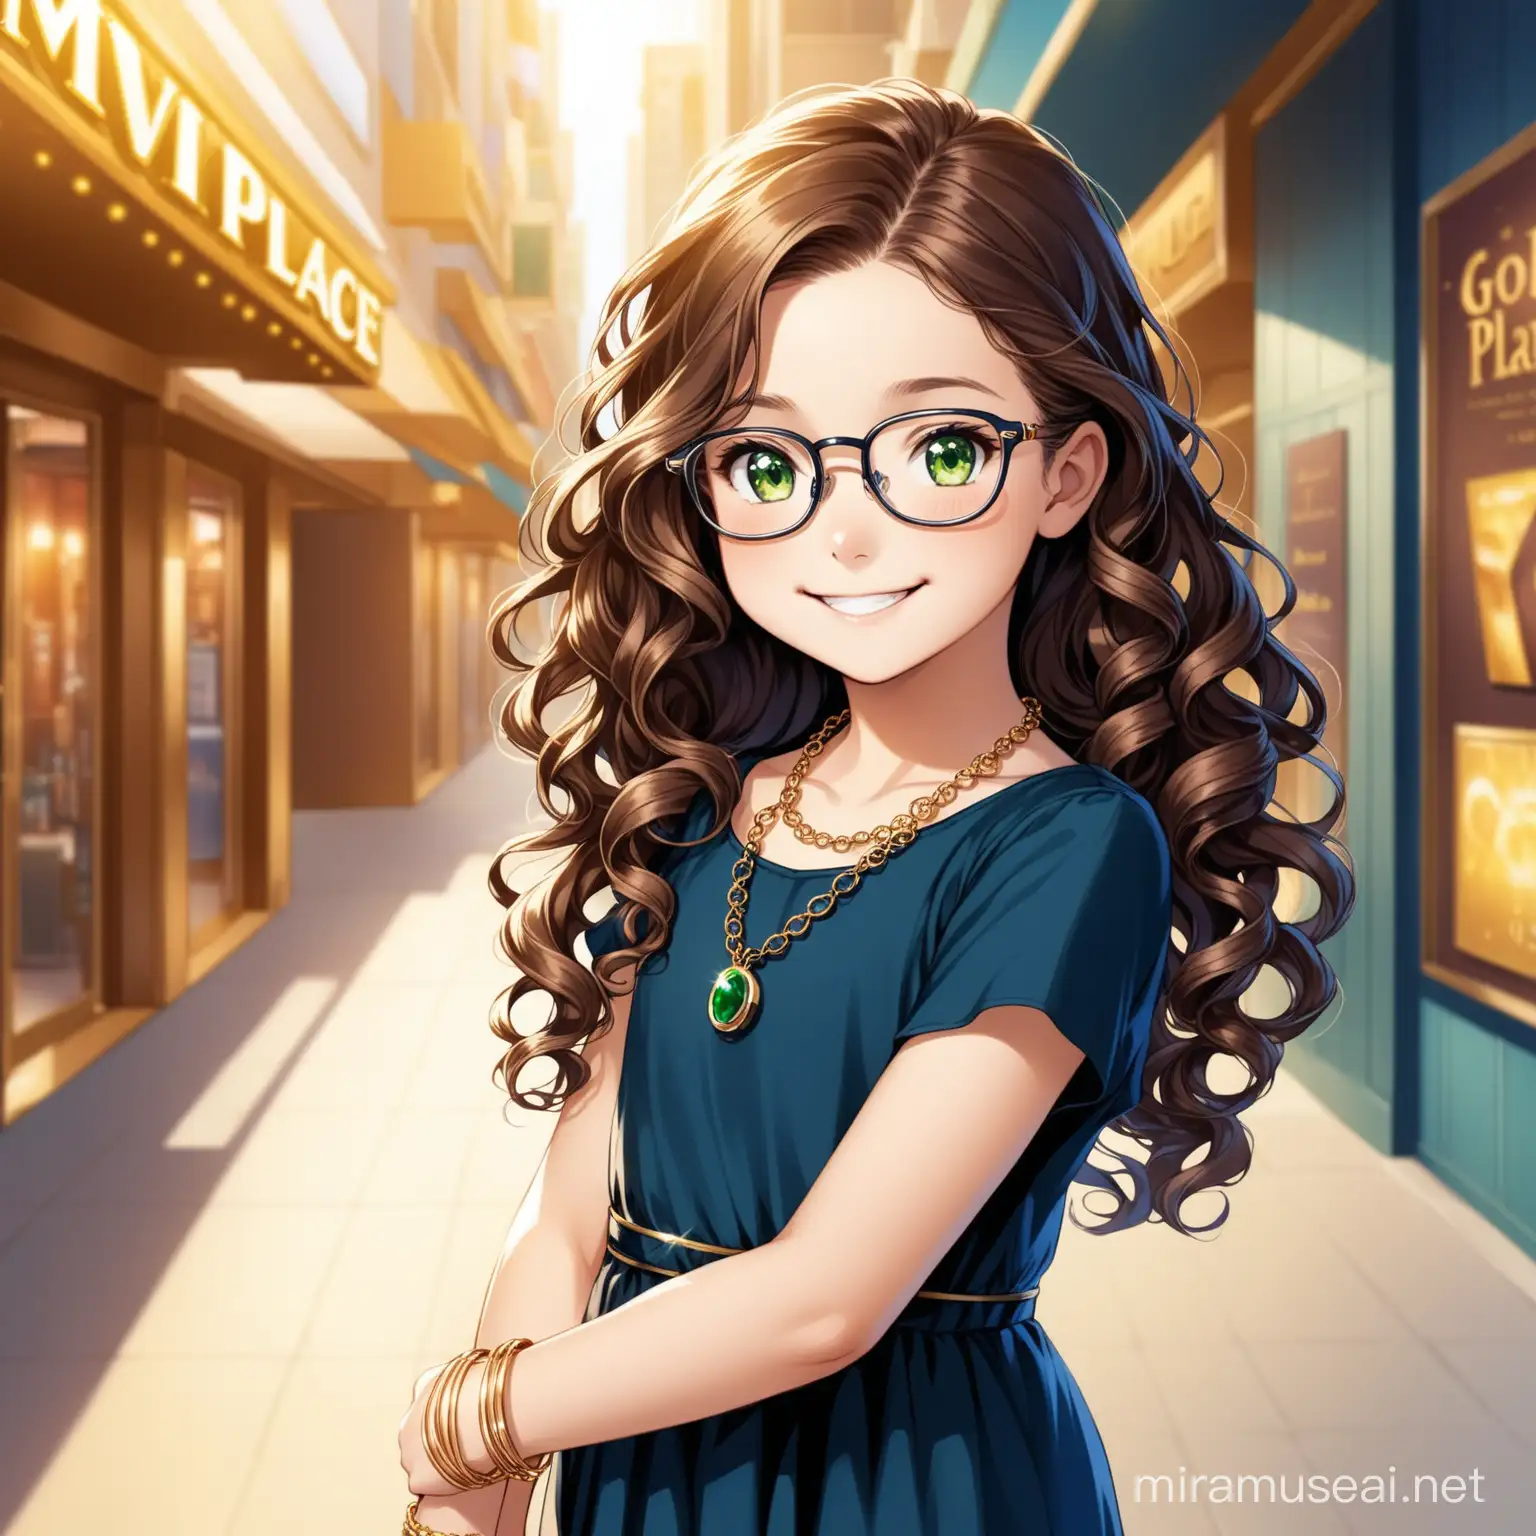 11 year old girl, long hair curly brown ringlets, green eyes, smiling, black glasses, long one sleeve dark blue dress, gold necklace, gold bracelet, movie star place, 